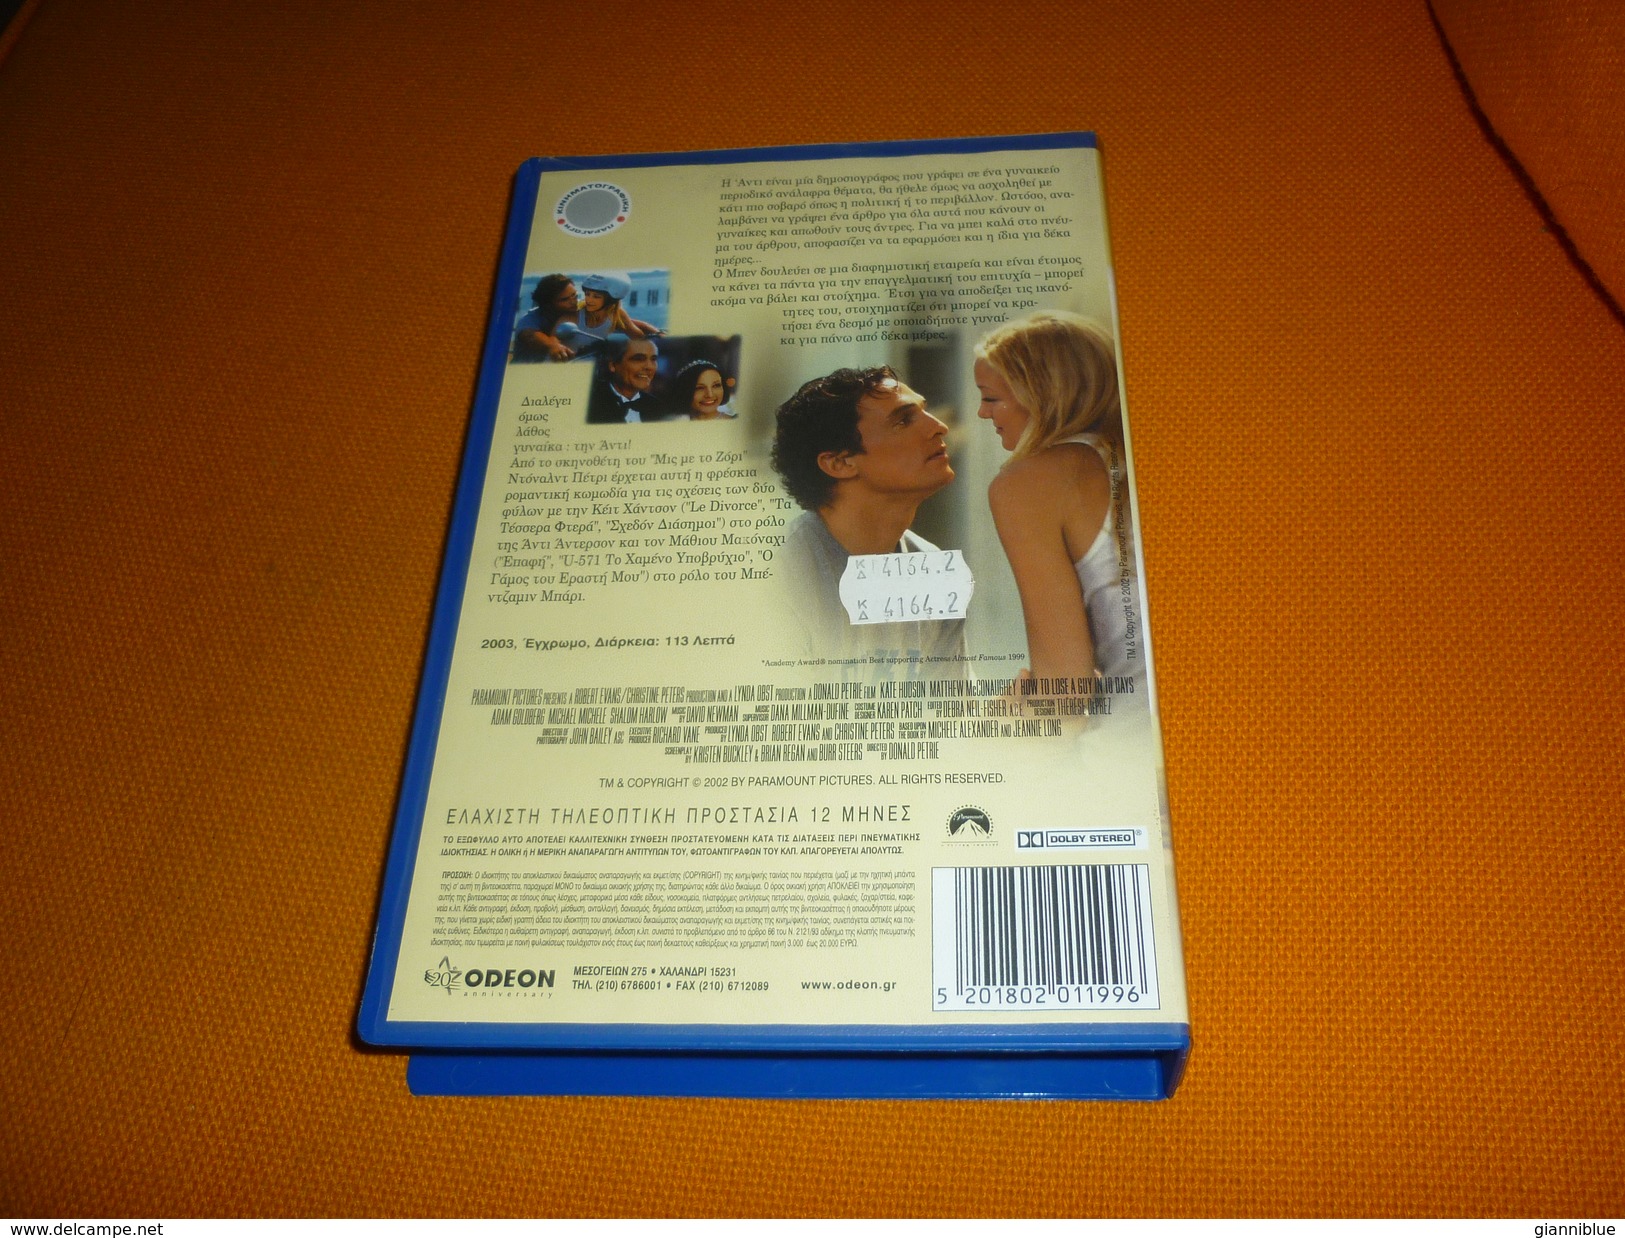 How To Lose A Guy In 10 Days Old Greek Vhs Cassette Tape From Greece - Romantiek